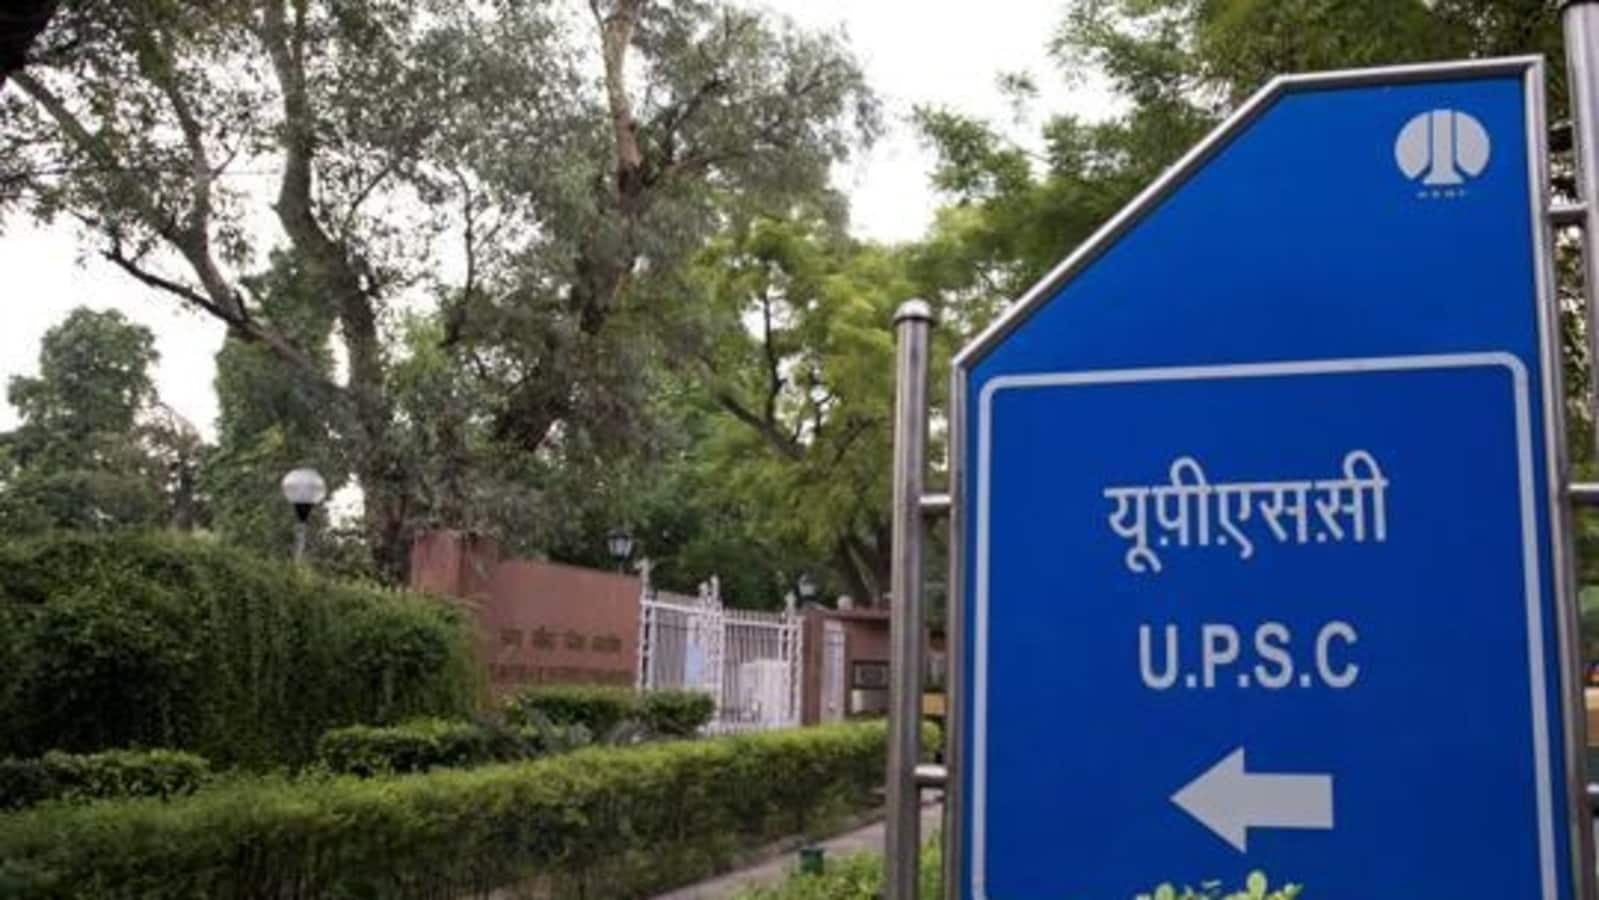 UPSC Recruitment 2022: Apply for 52 Prosecutor and other posts at upsc.gov.in